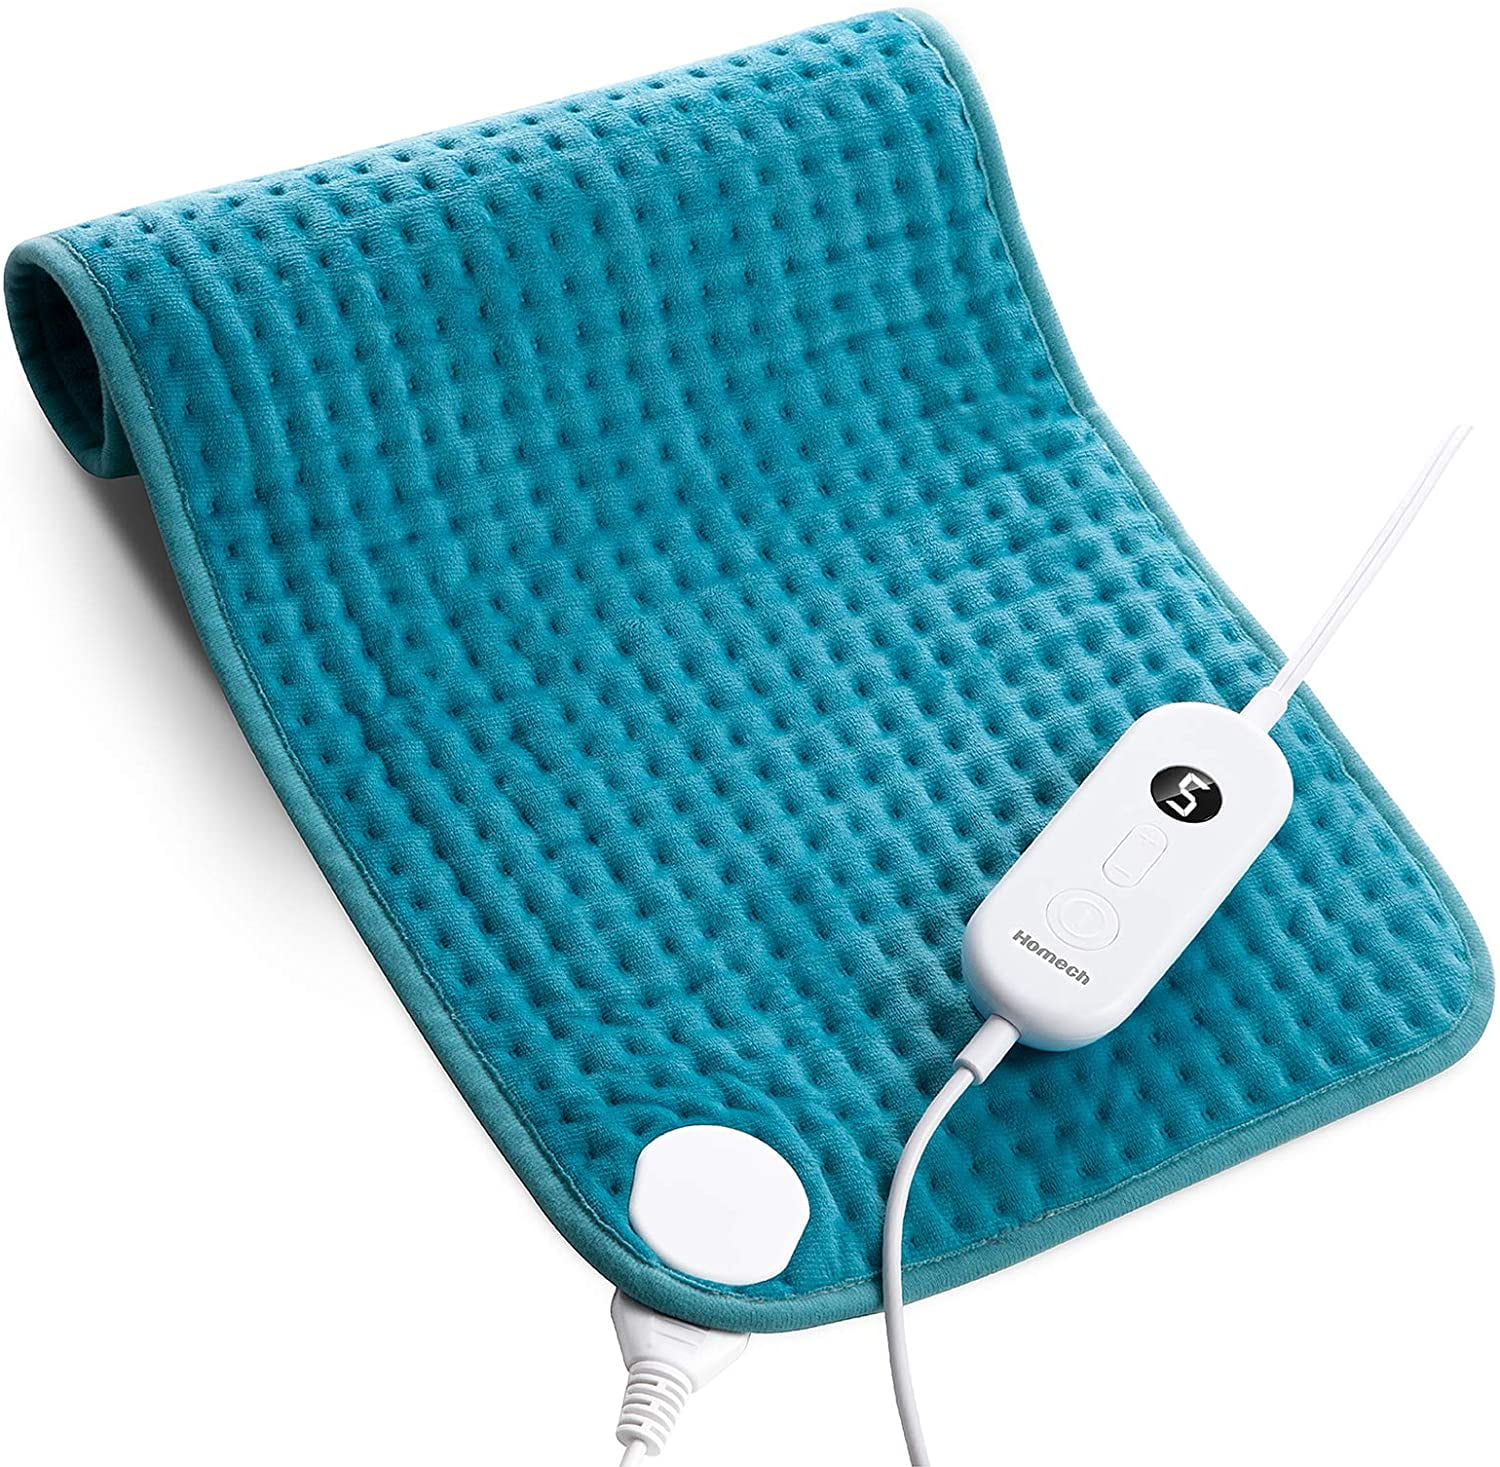  Heating Pad for Back Pain Relief & Cramps, KOT Heating